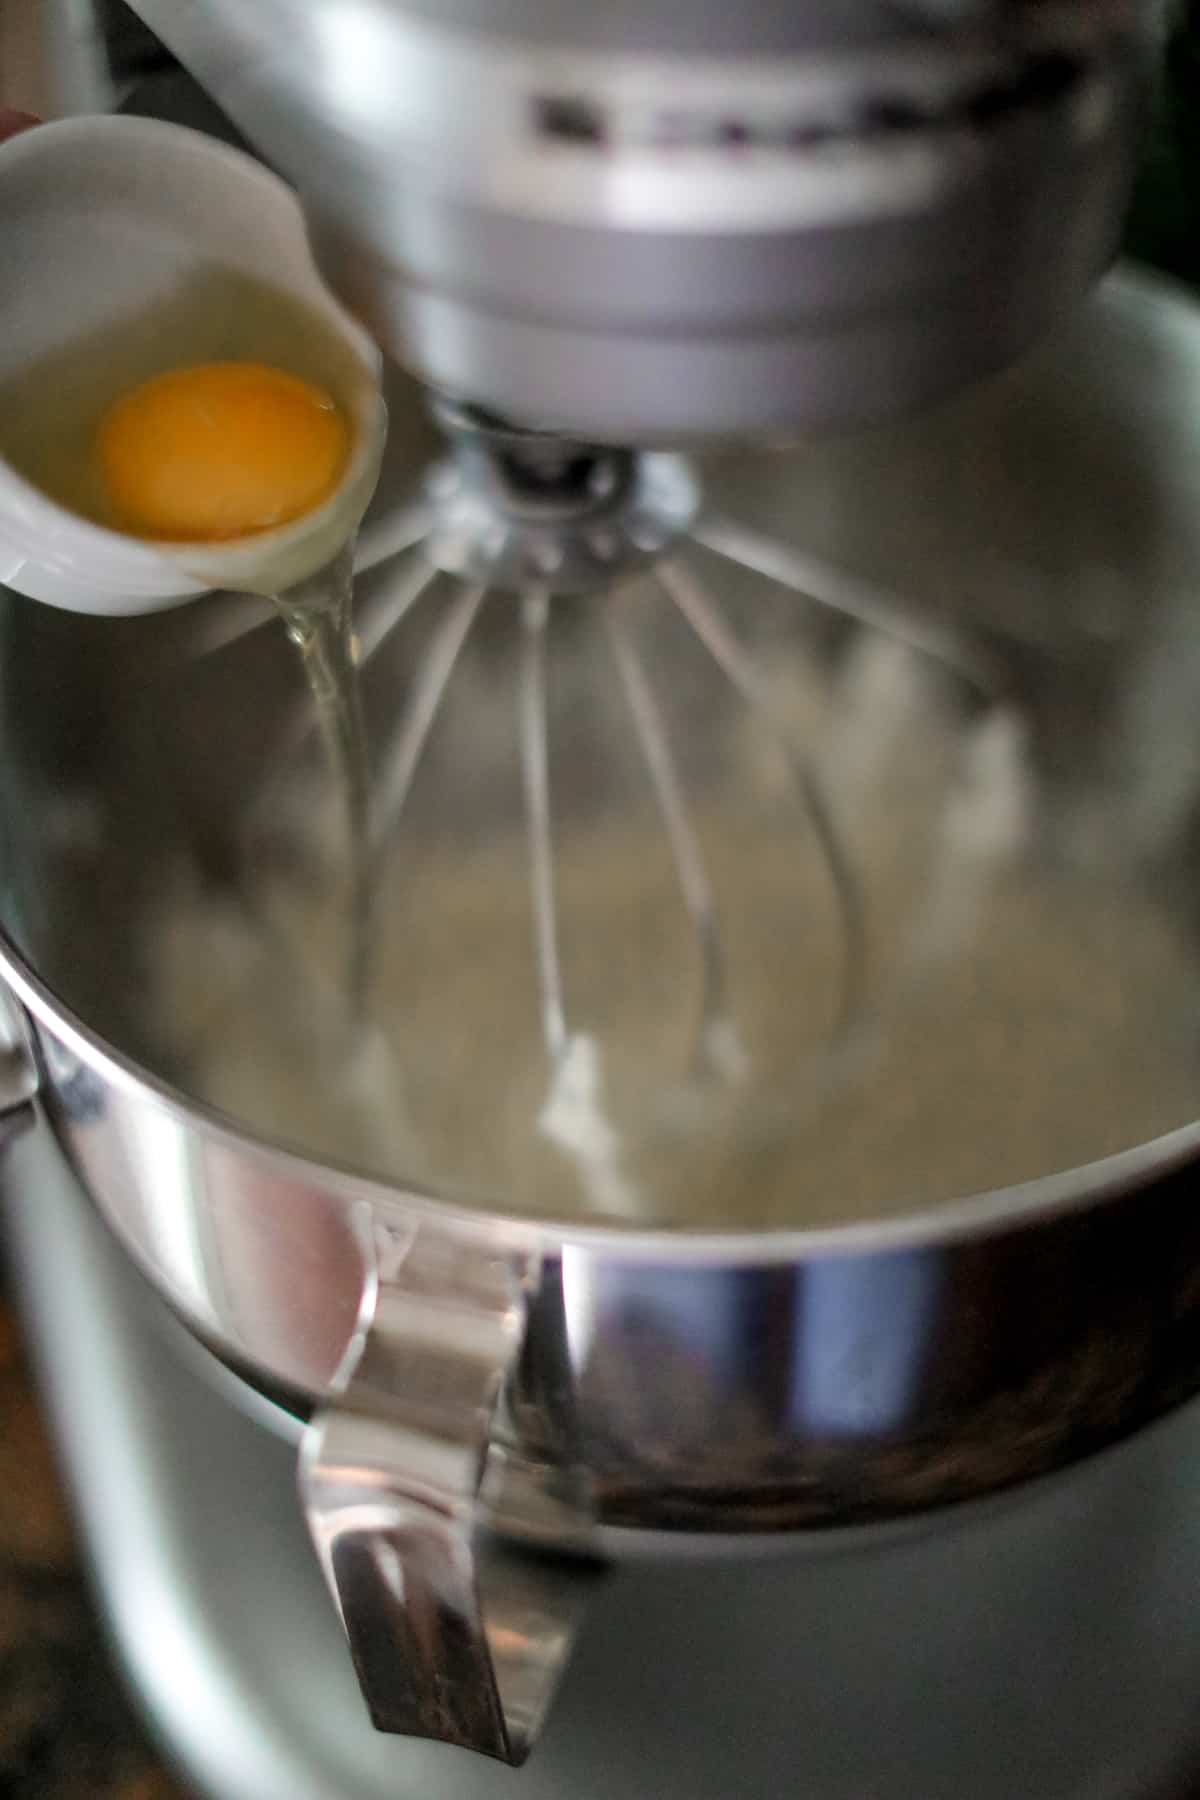 Egg going into large bowl of stand mixer.